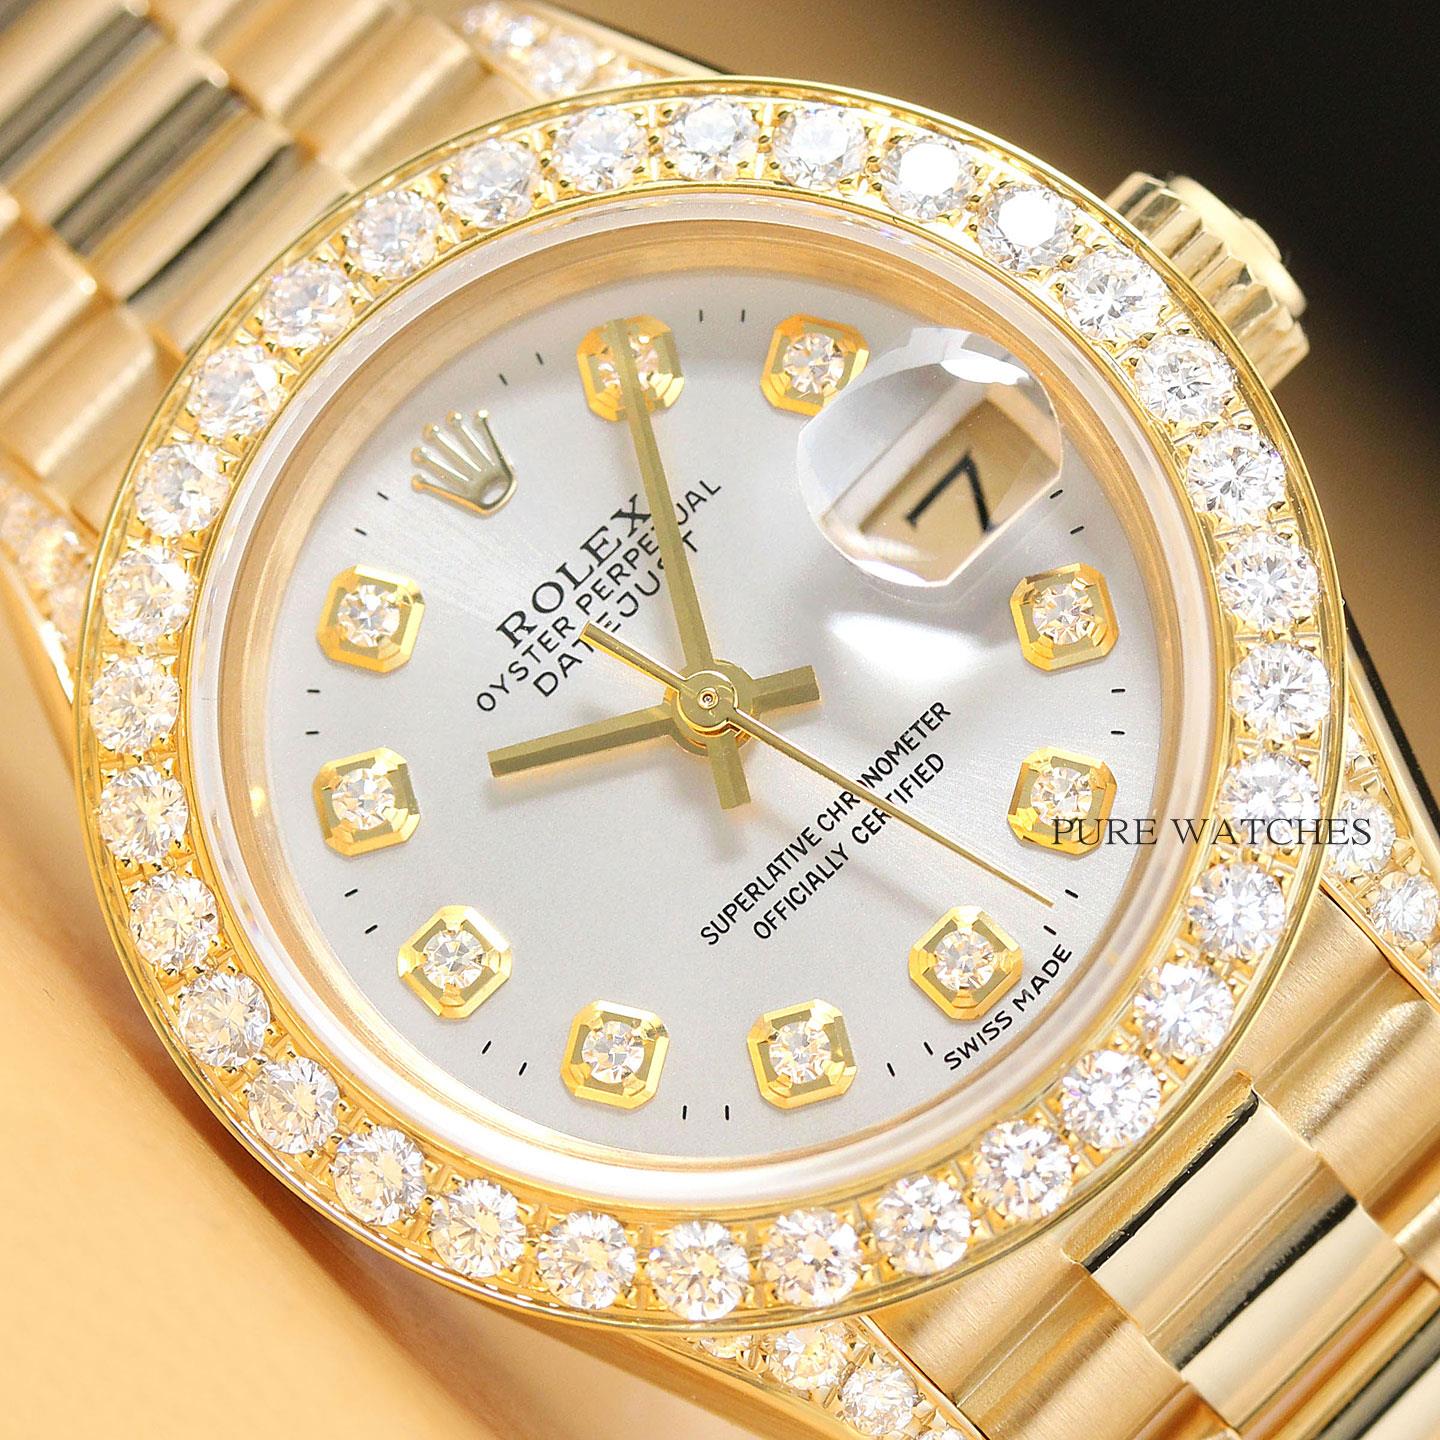 Ladies Rolex Ultimate Buying Guide Bob's Watches, 41% OFF